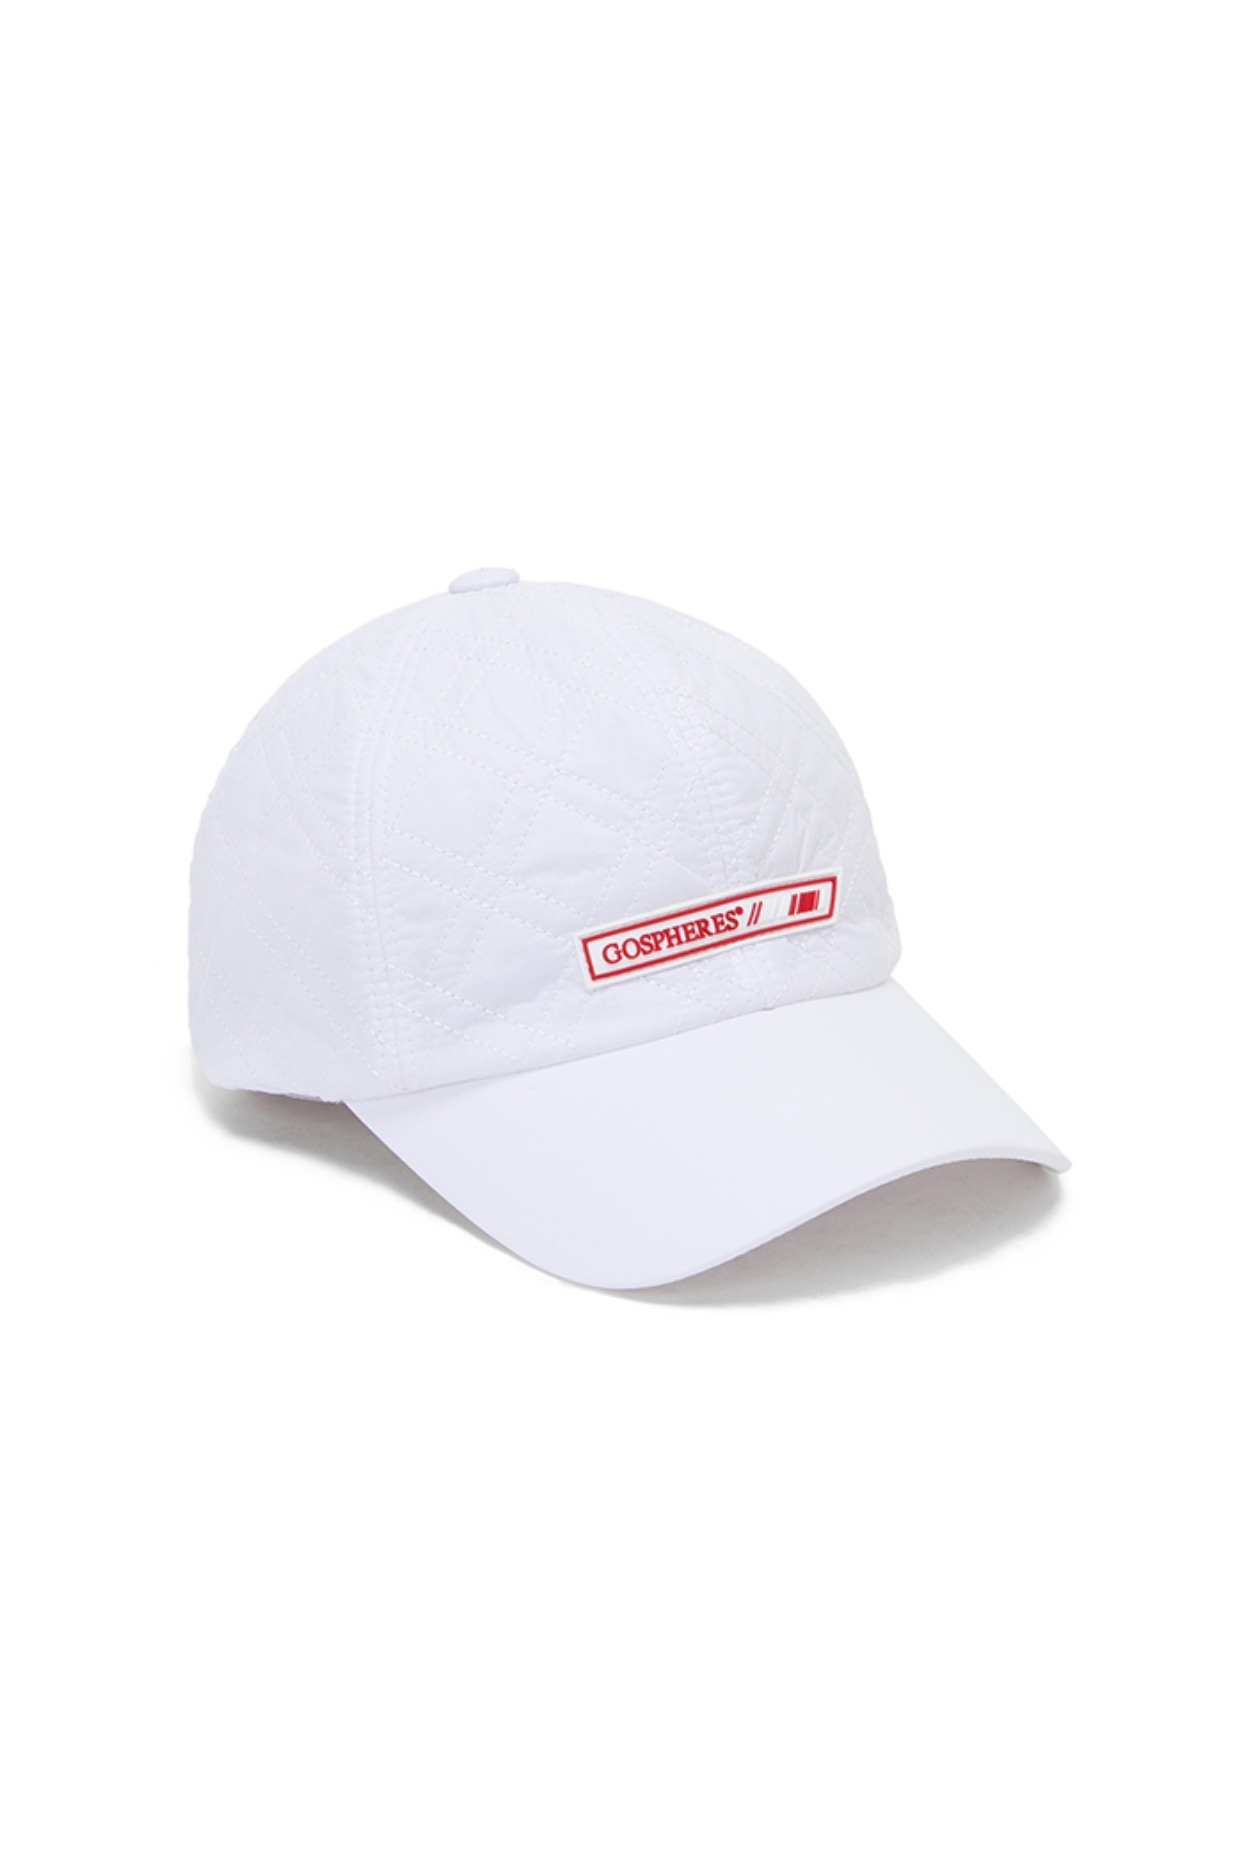 W LOGO PATCH QUILTED CAP WHITE